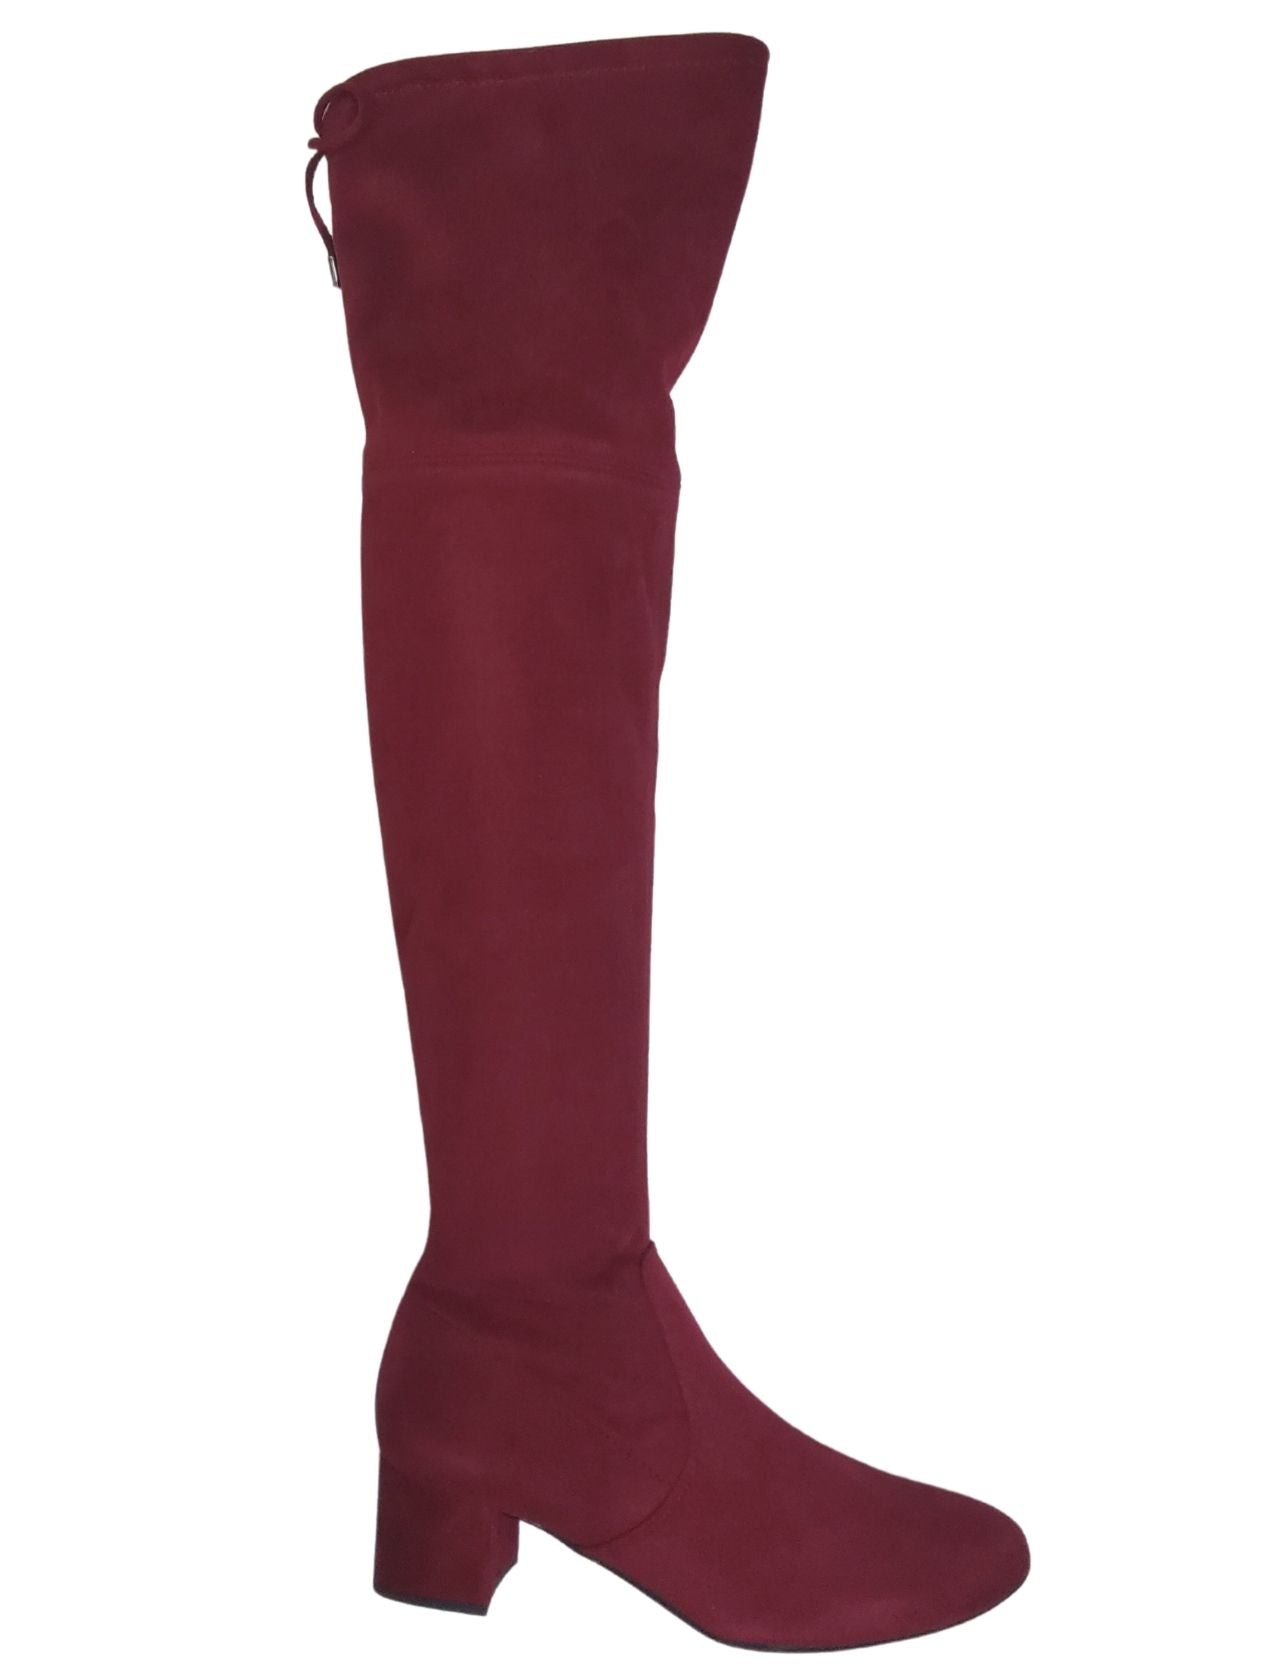 Women's Footwear Over-the-knee boot in red eco suede with rear laces